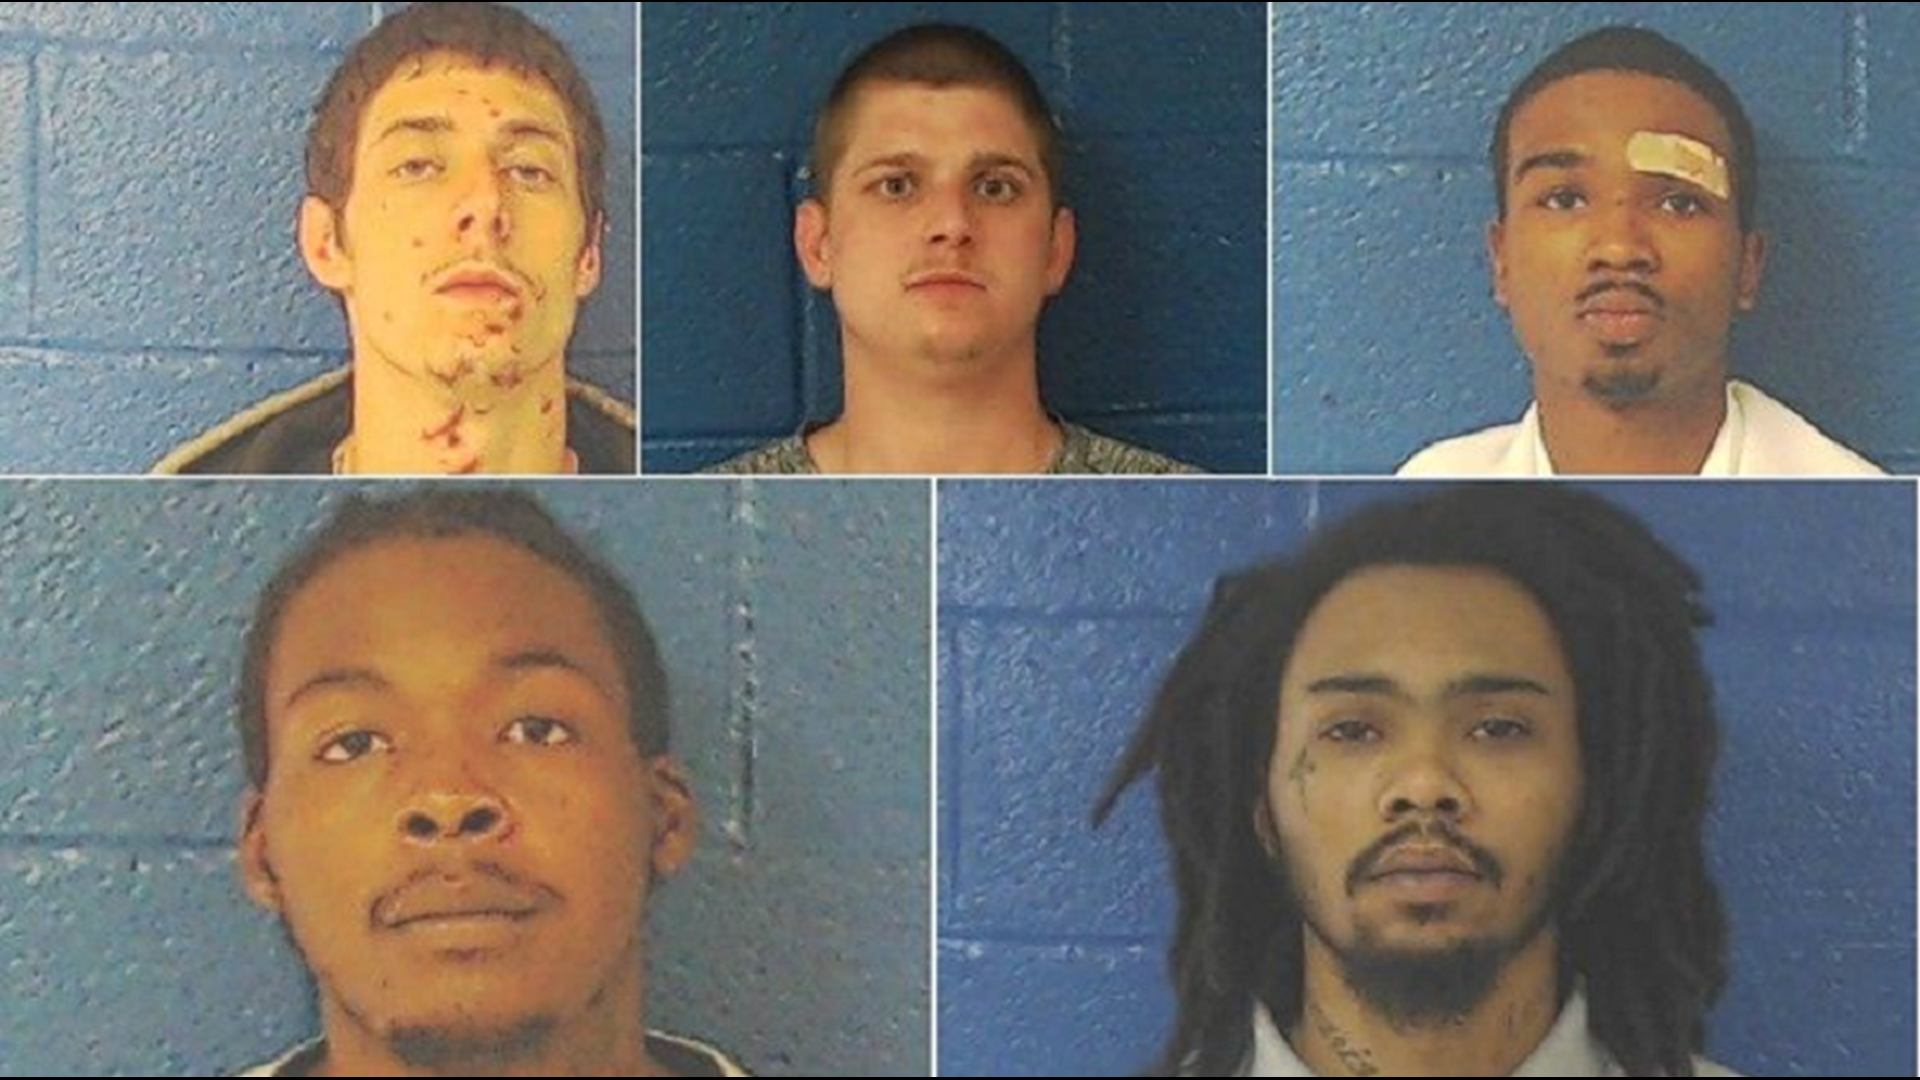 Law enforcement are searching for five escaped inmates. Nash Co. Sheriff, Keith Stone confirmed the escaped inmates are Raheem Horne, 25, Laquaris Battle, 22, David Viverrette, 28, David Ruffin, 30, And Keonte Murphy, 23.